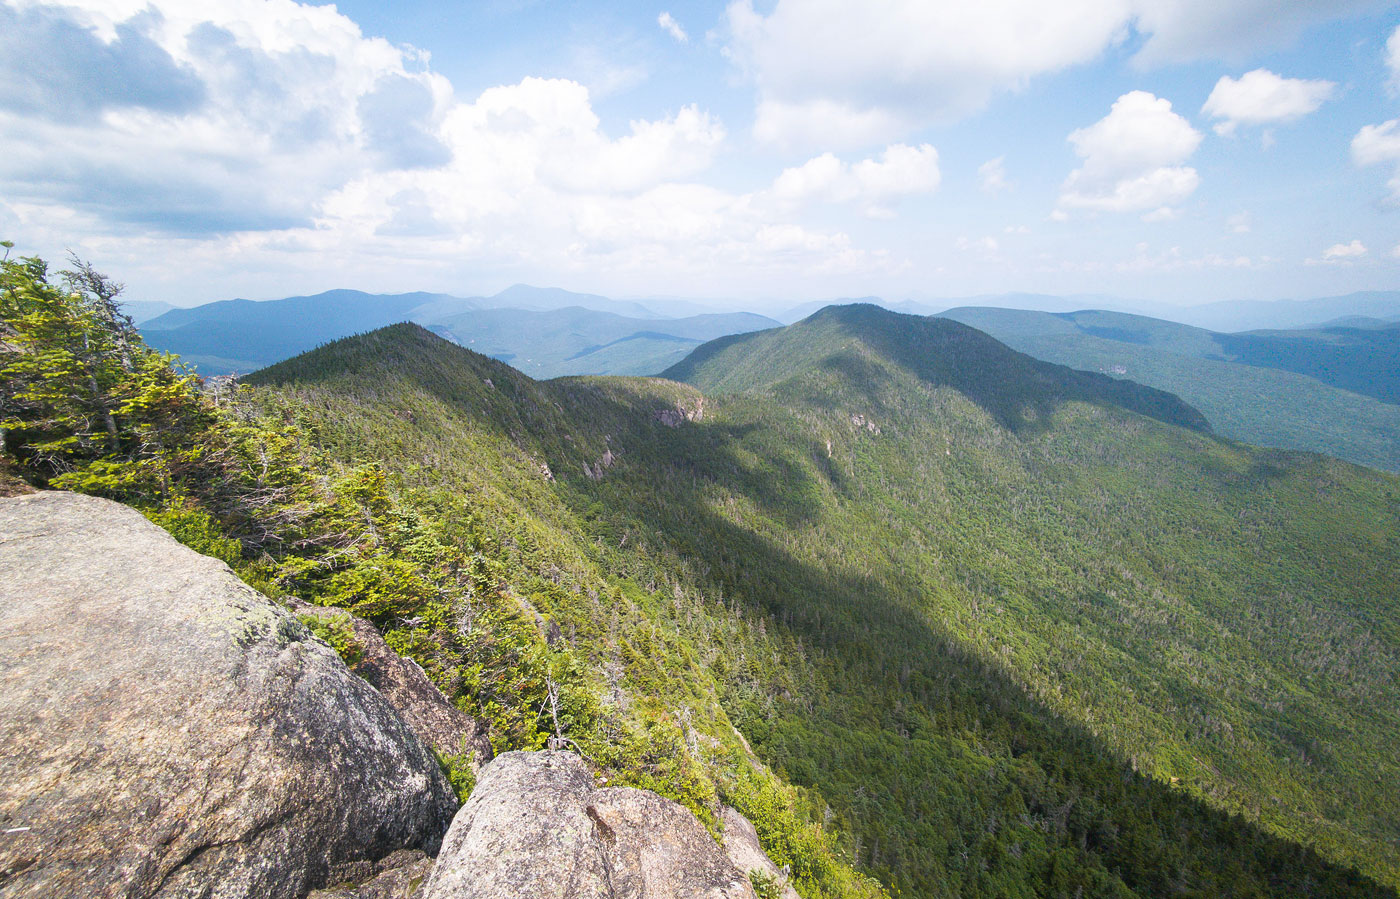 Hike Mount Osceola via Greeley Ponds Trail in White Mountain National Forest, New Hampshire - Stav is Lost